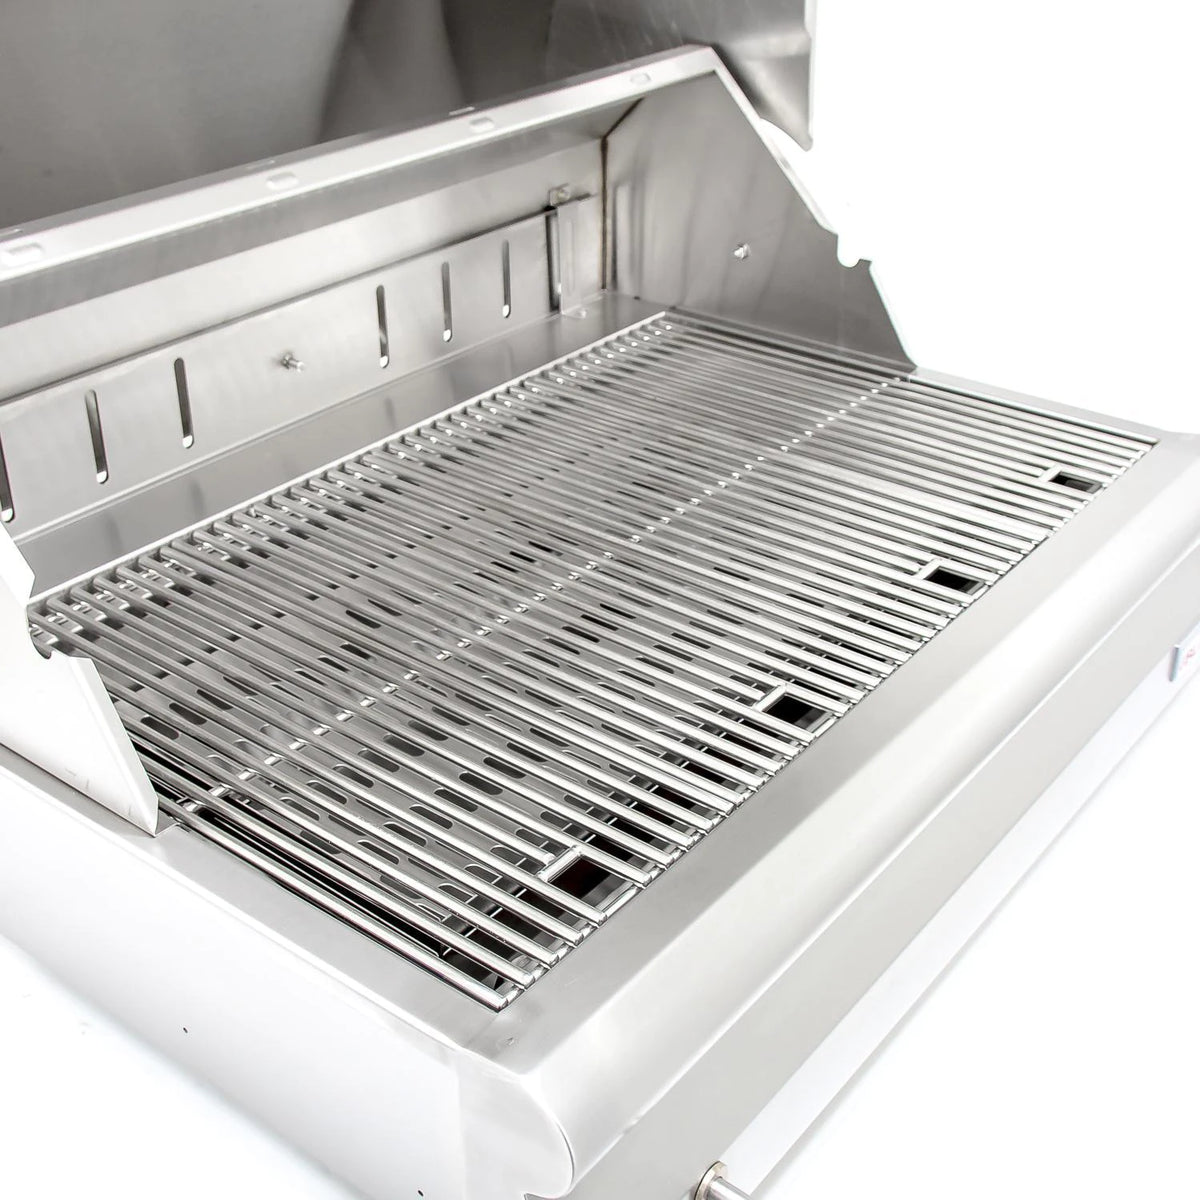 Blaze 4 Cooking Grids 32 Inch Charcoal Grill Stainless Steel Cooking Grates